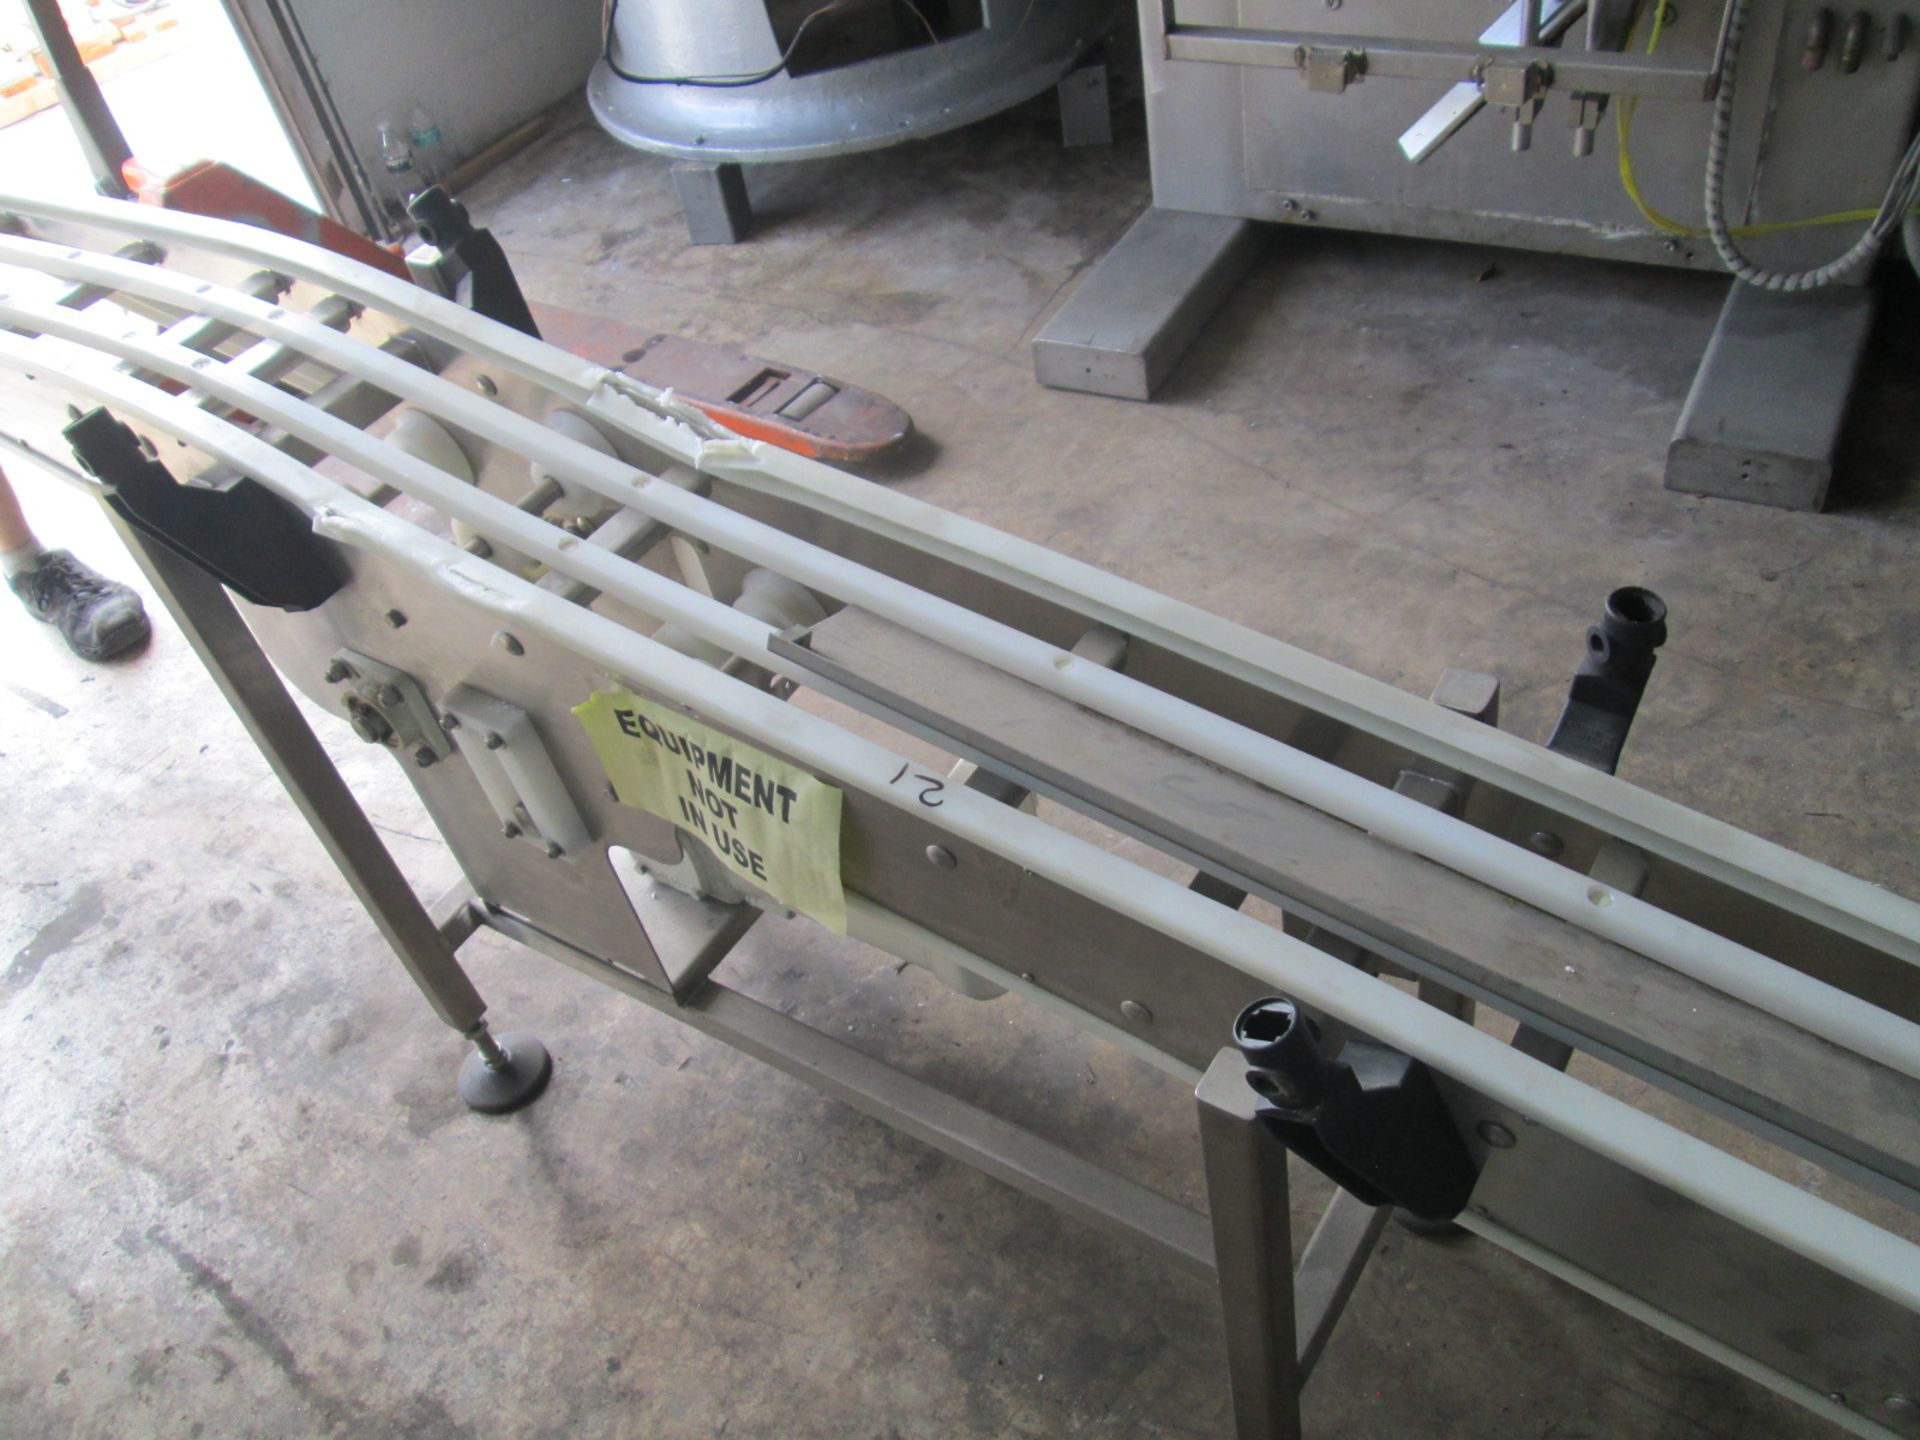 Motorized Stainless Steel Conveyor Section, (less belt) 1/2HP Gear Reduced Drive, on 110v, - Image 4 of 5